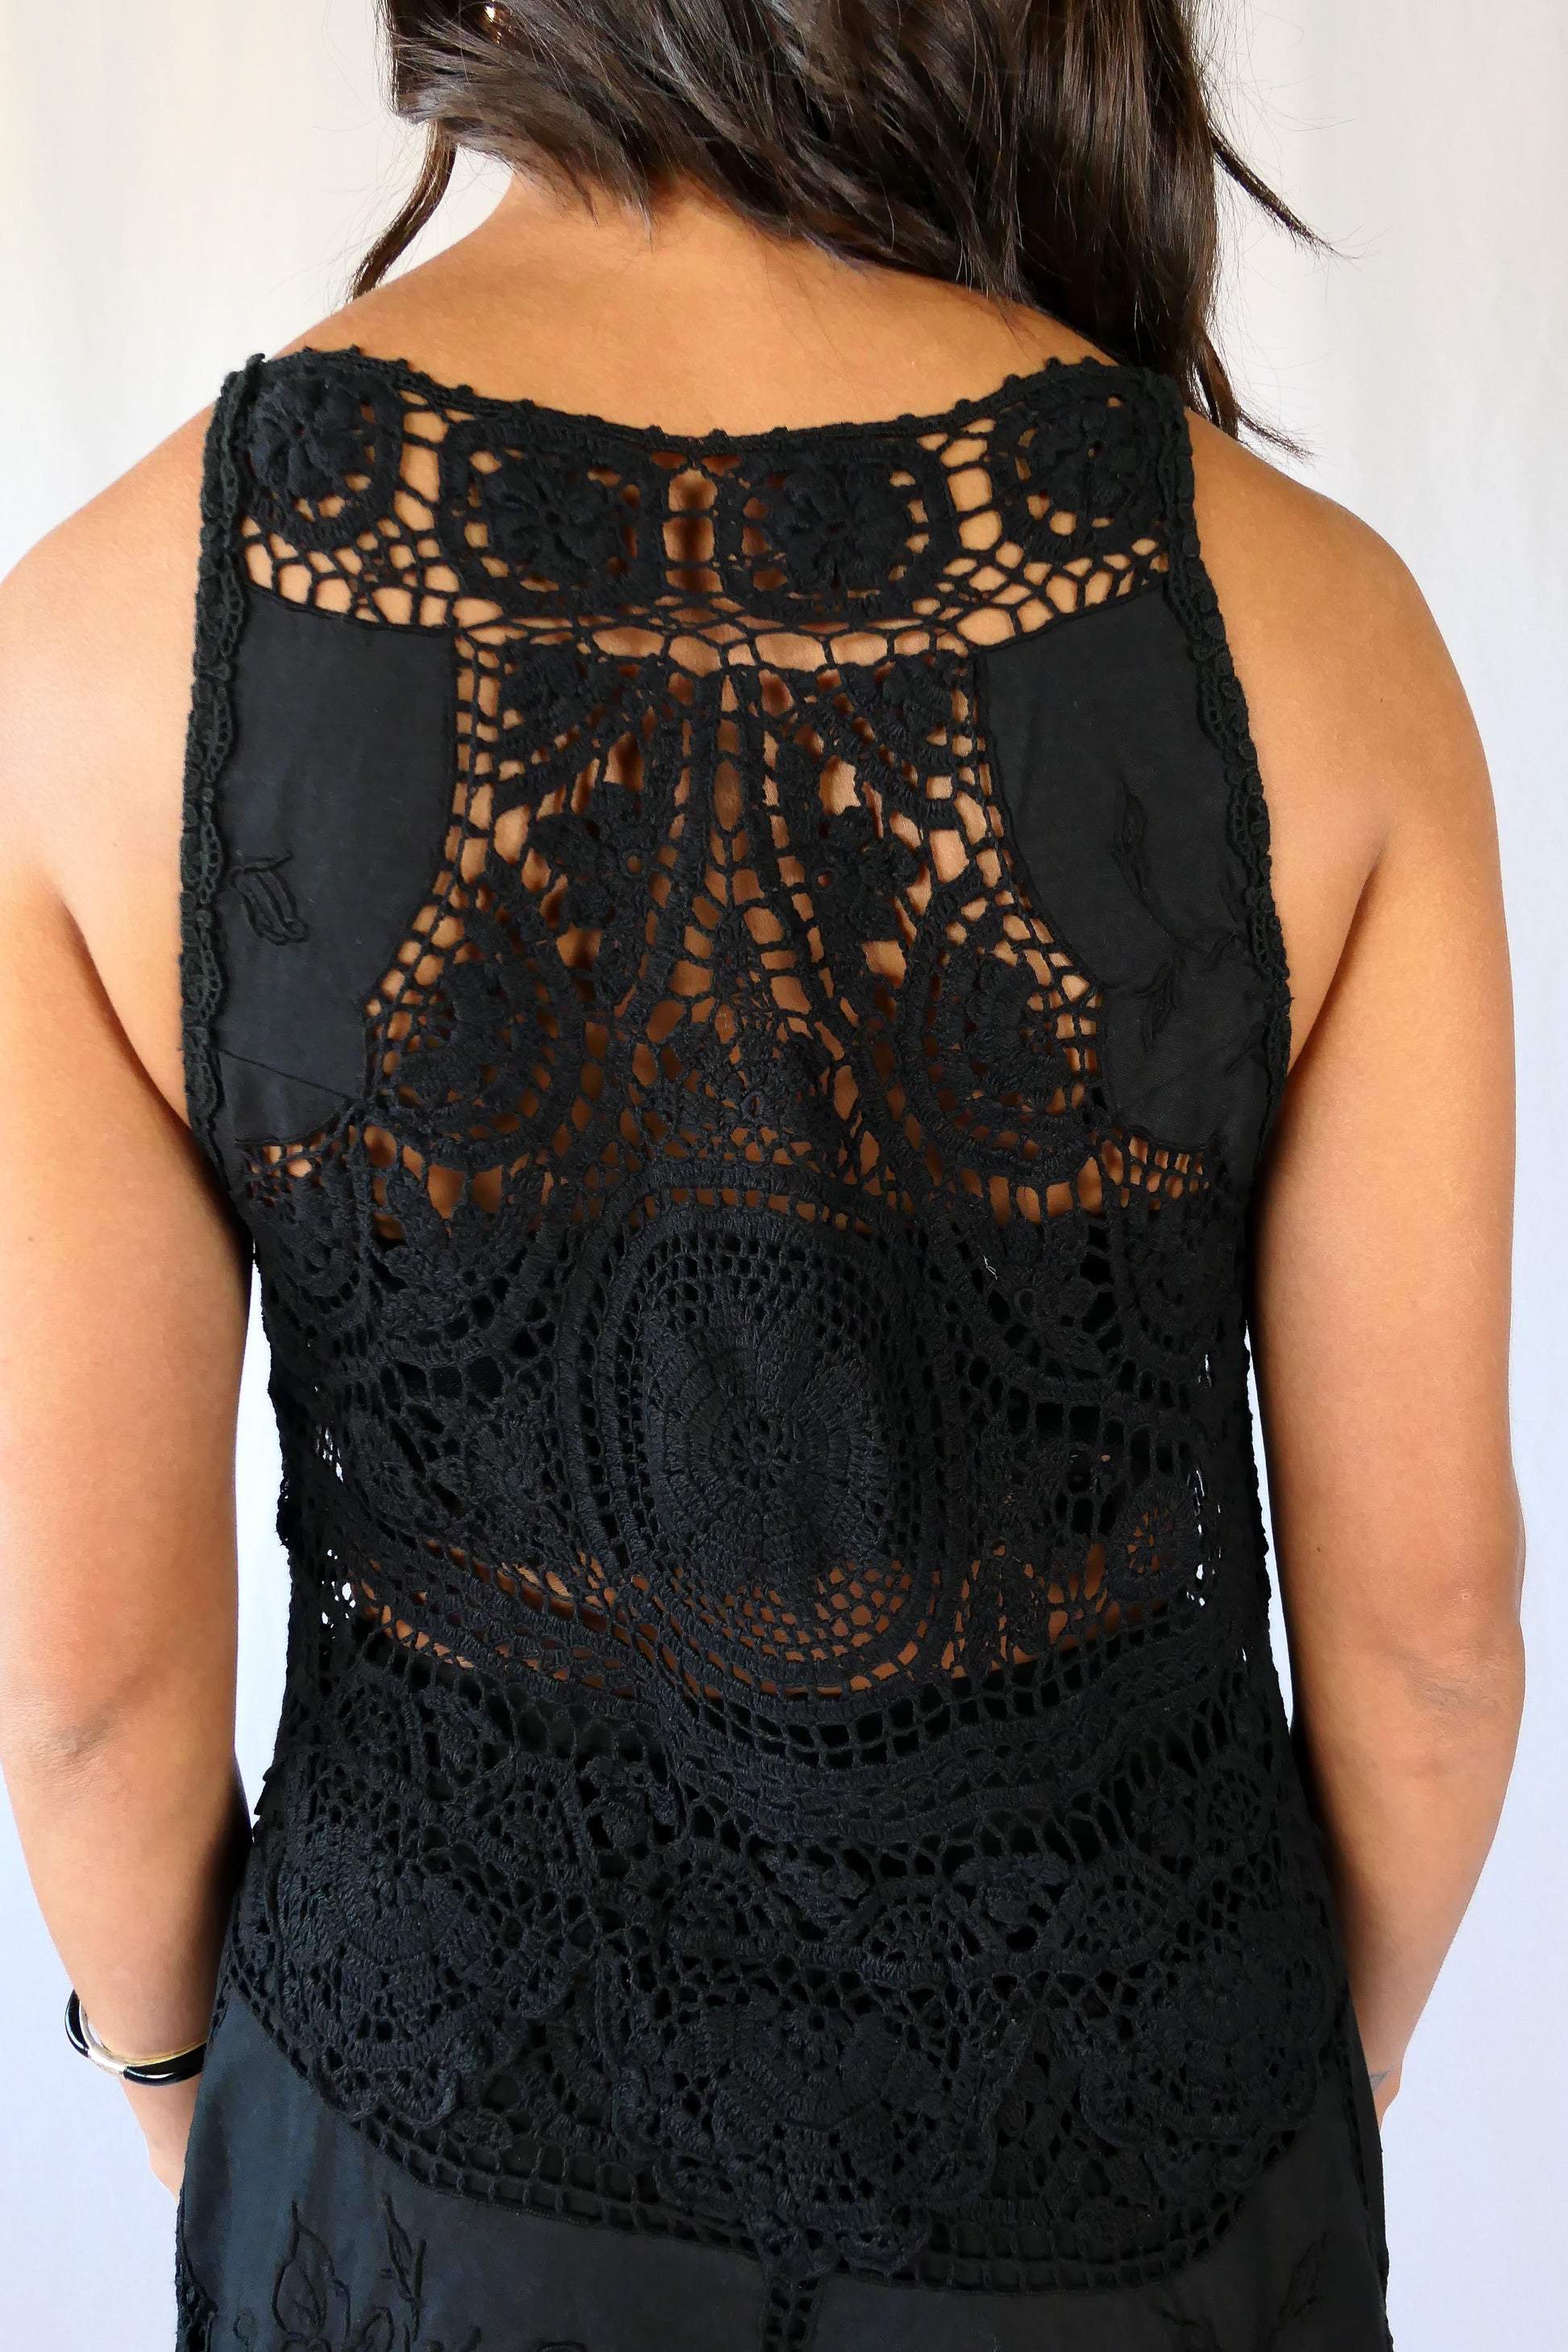 Close-up of the back. This Little Black Dress with detailed hand crochet and embroidery work lends itself a vintage flair.  The dress can be buttoned up the front or back, has a flattering fit at the waist, and flares out towards the hem.  Wear it as a cocktail dress with black heels or sandals, or as a beach coverup.  